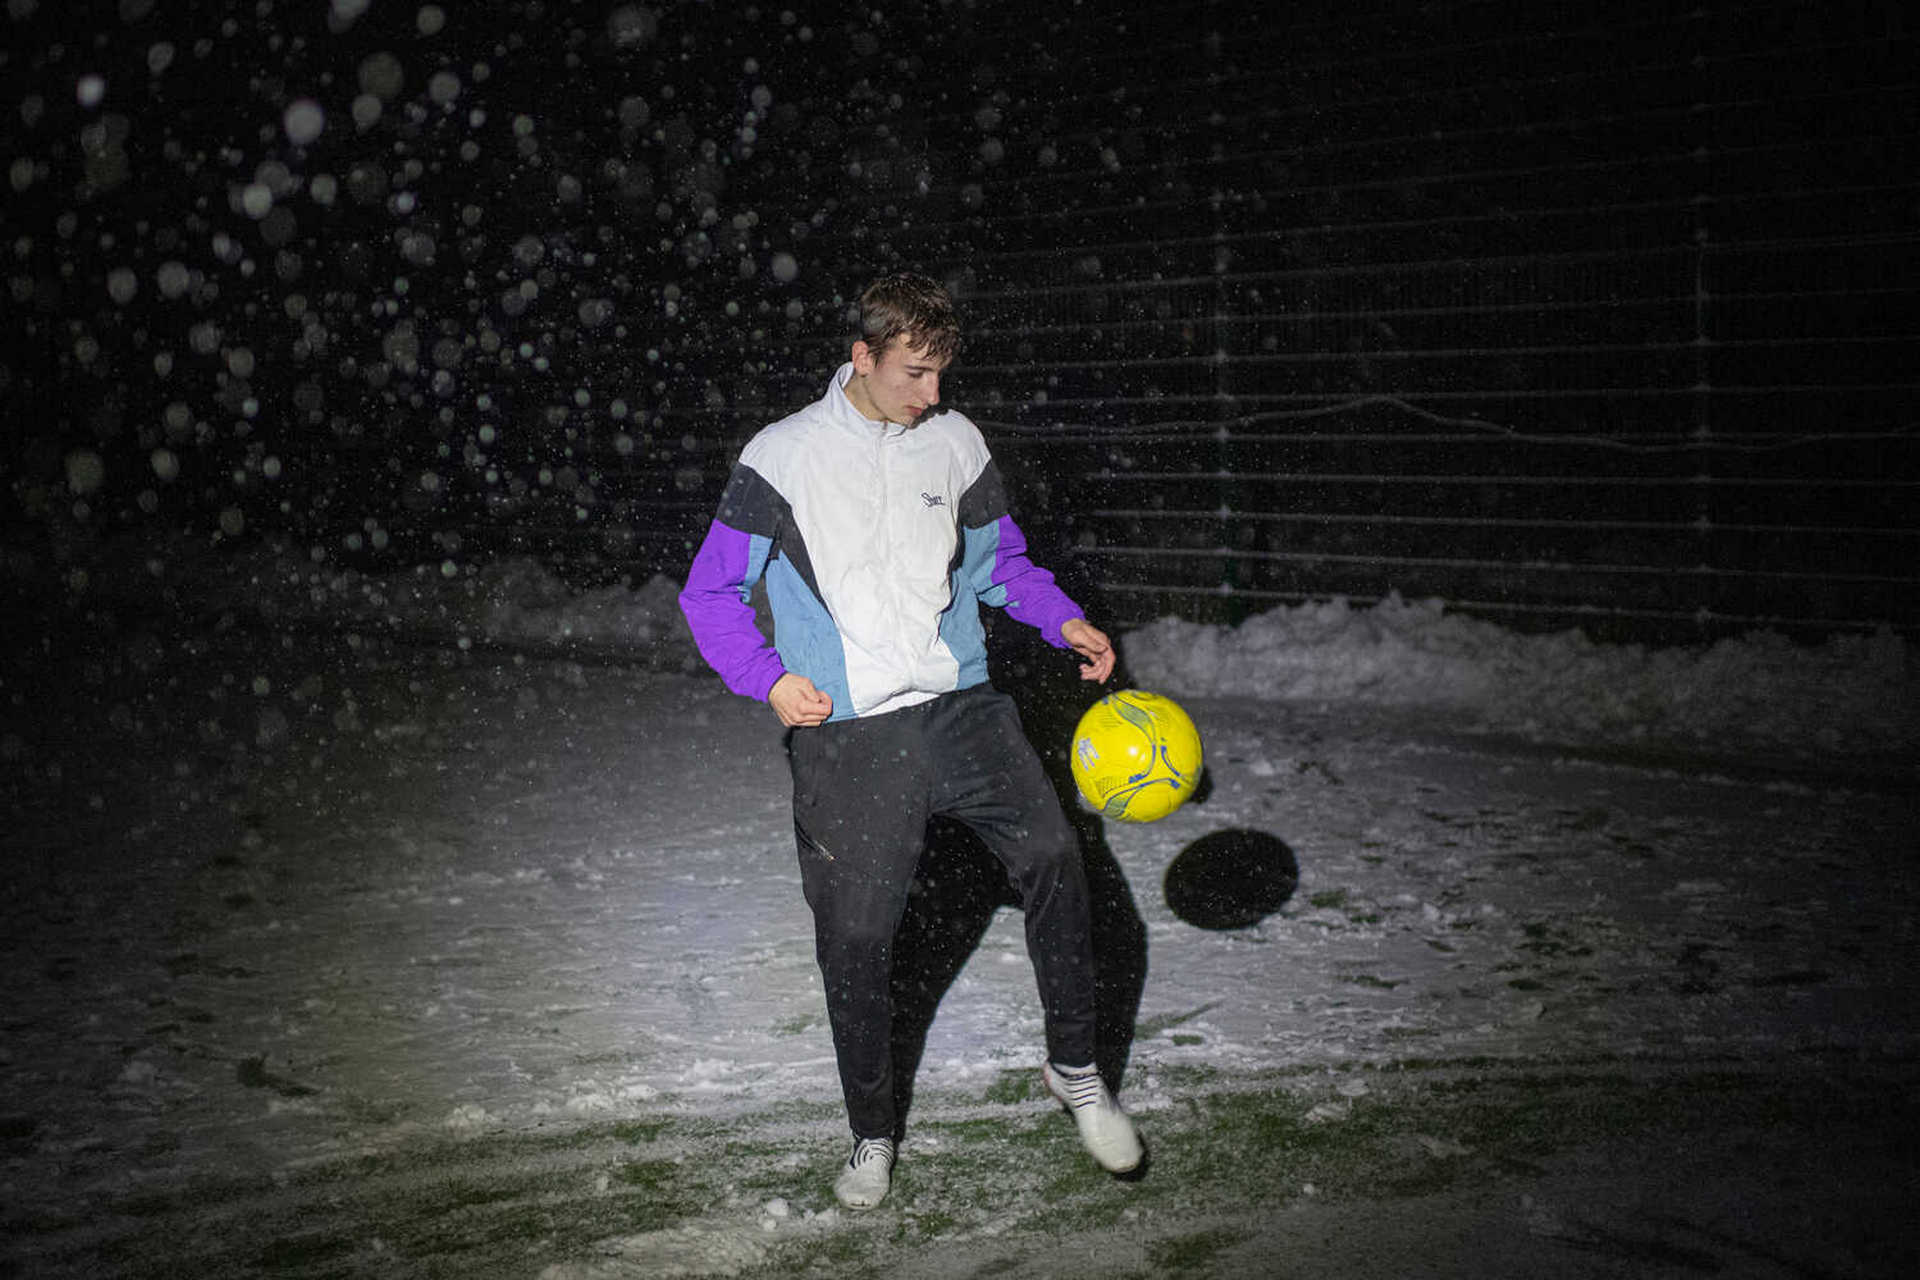 Student Ivan Mahyrovskyi, 16, controls the ball in a soccer game during a blackout in Irpin